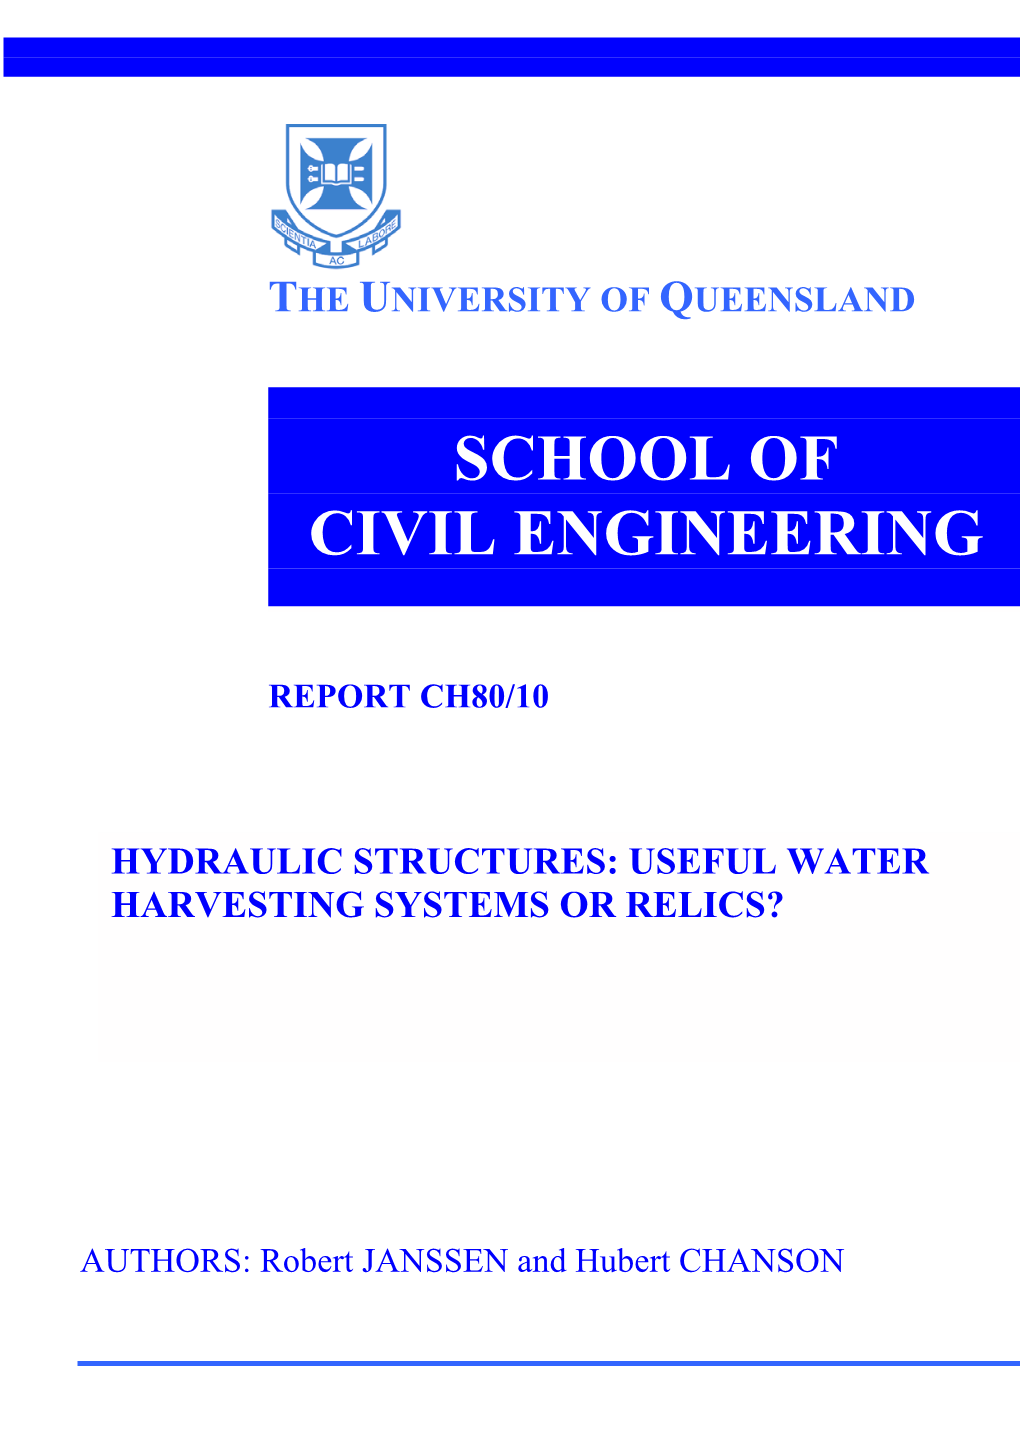 Hydraulic Structures: Useful Water Harvesting Systems Or Relics?